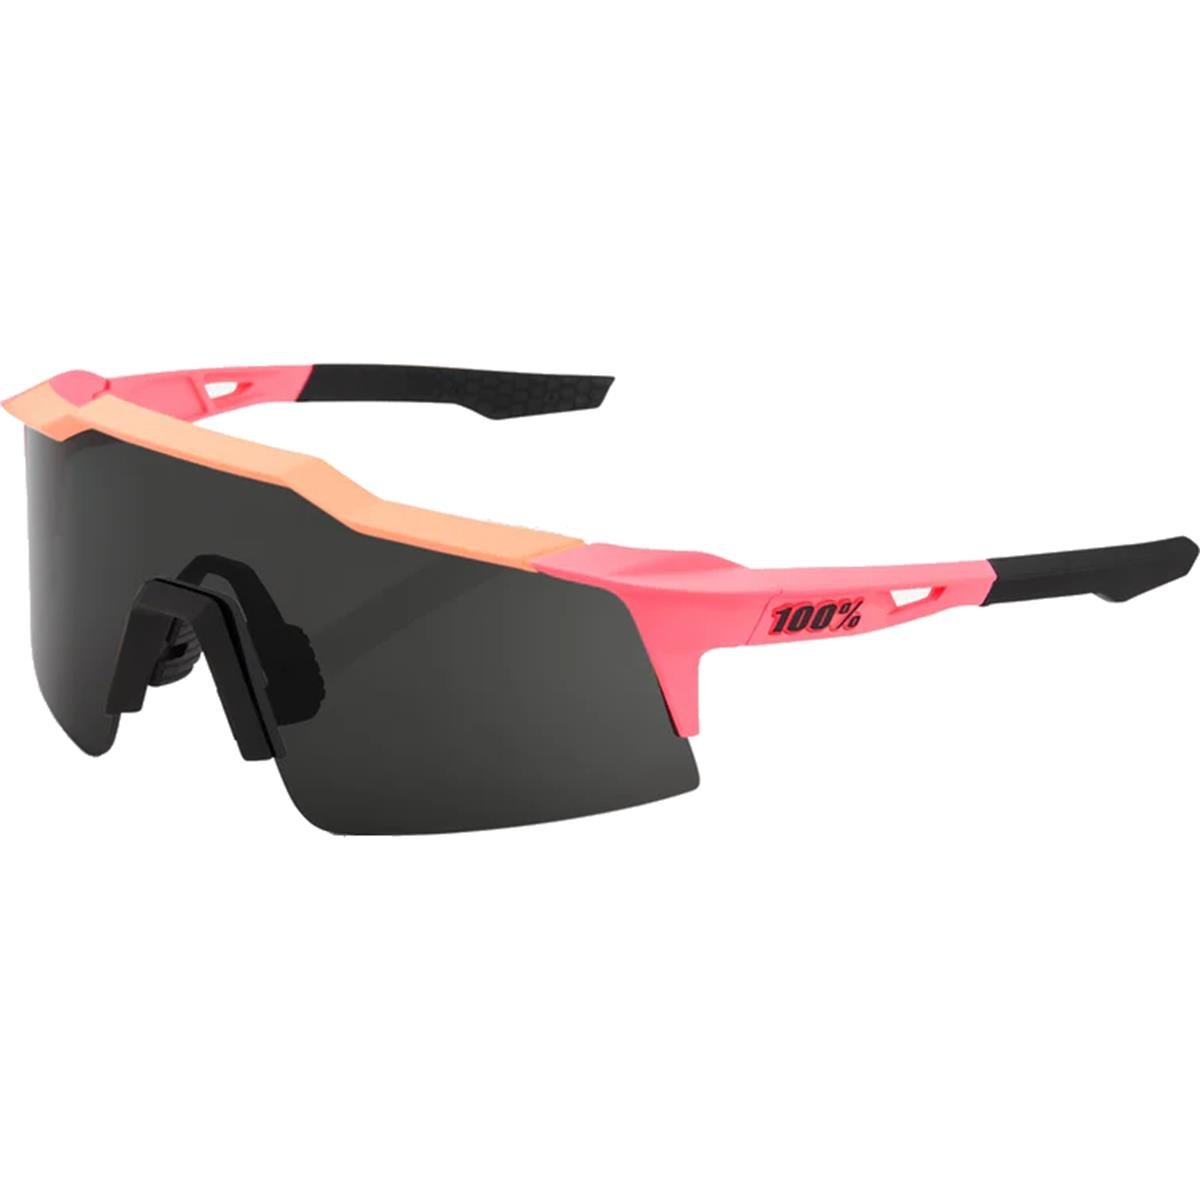 100% MTB-Sportbrille The Speedcraft SL Matte Washed Out Neon Pink - Smoke Lens